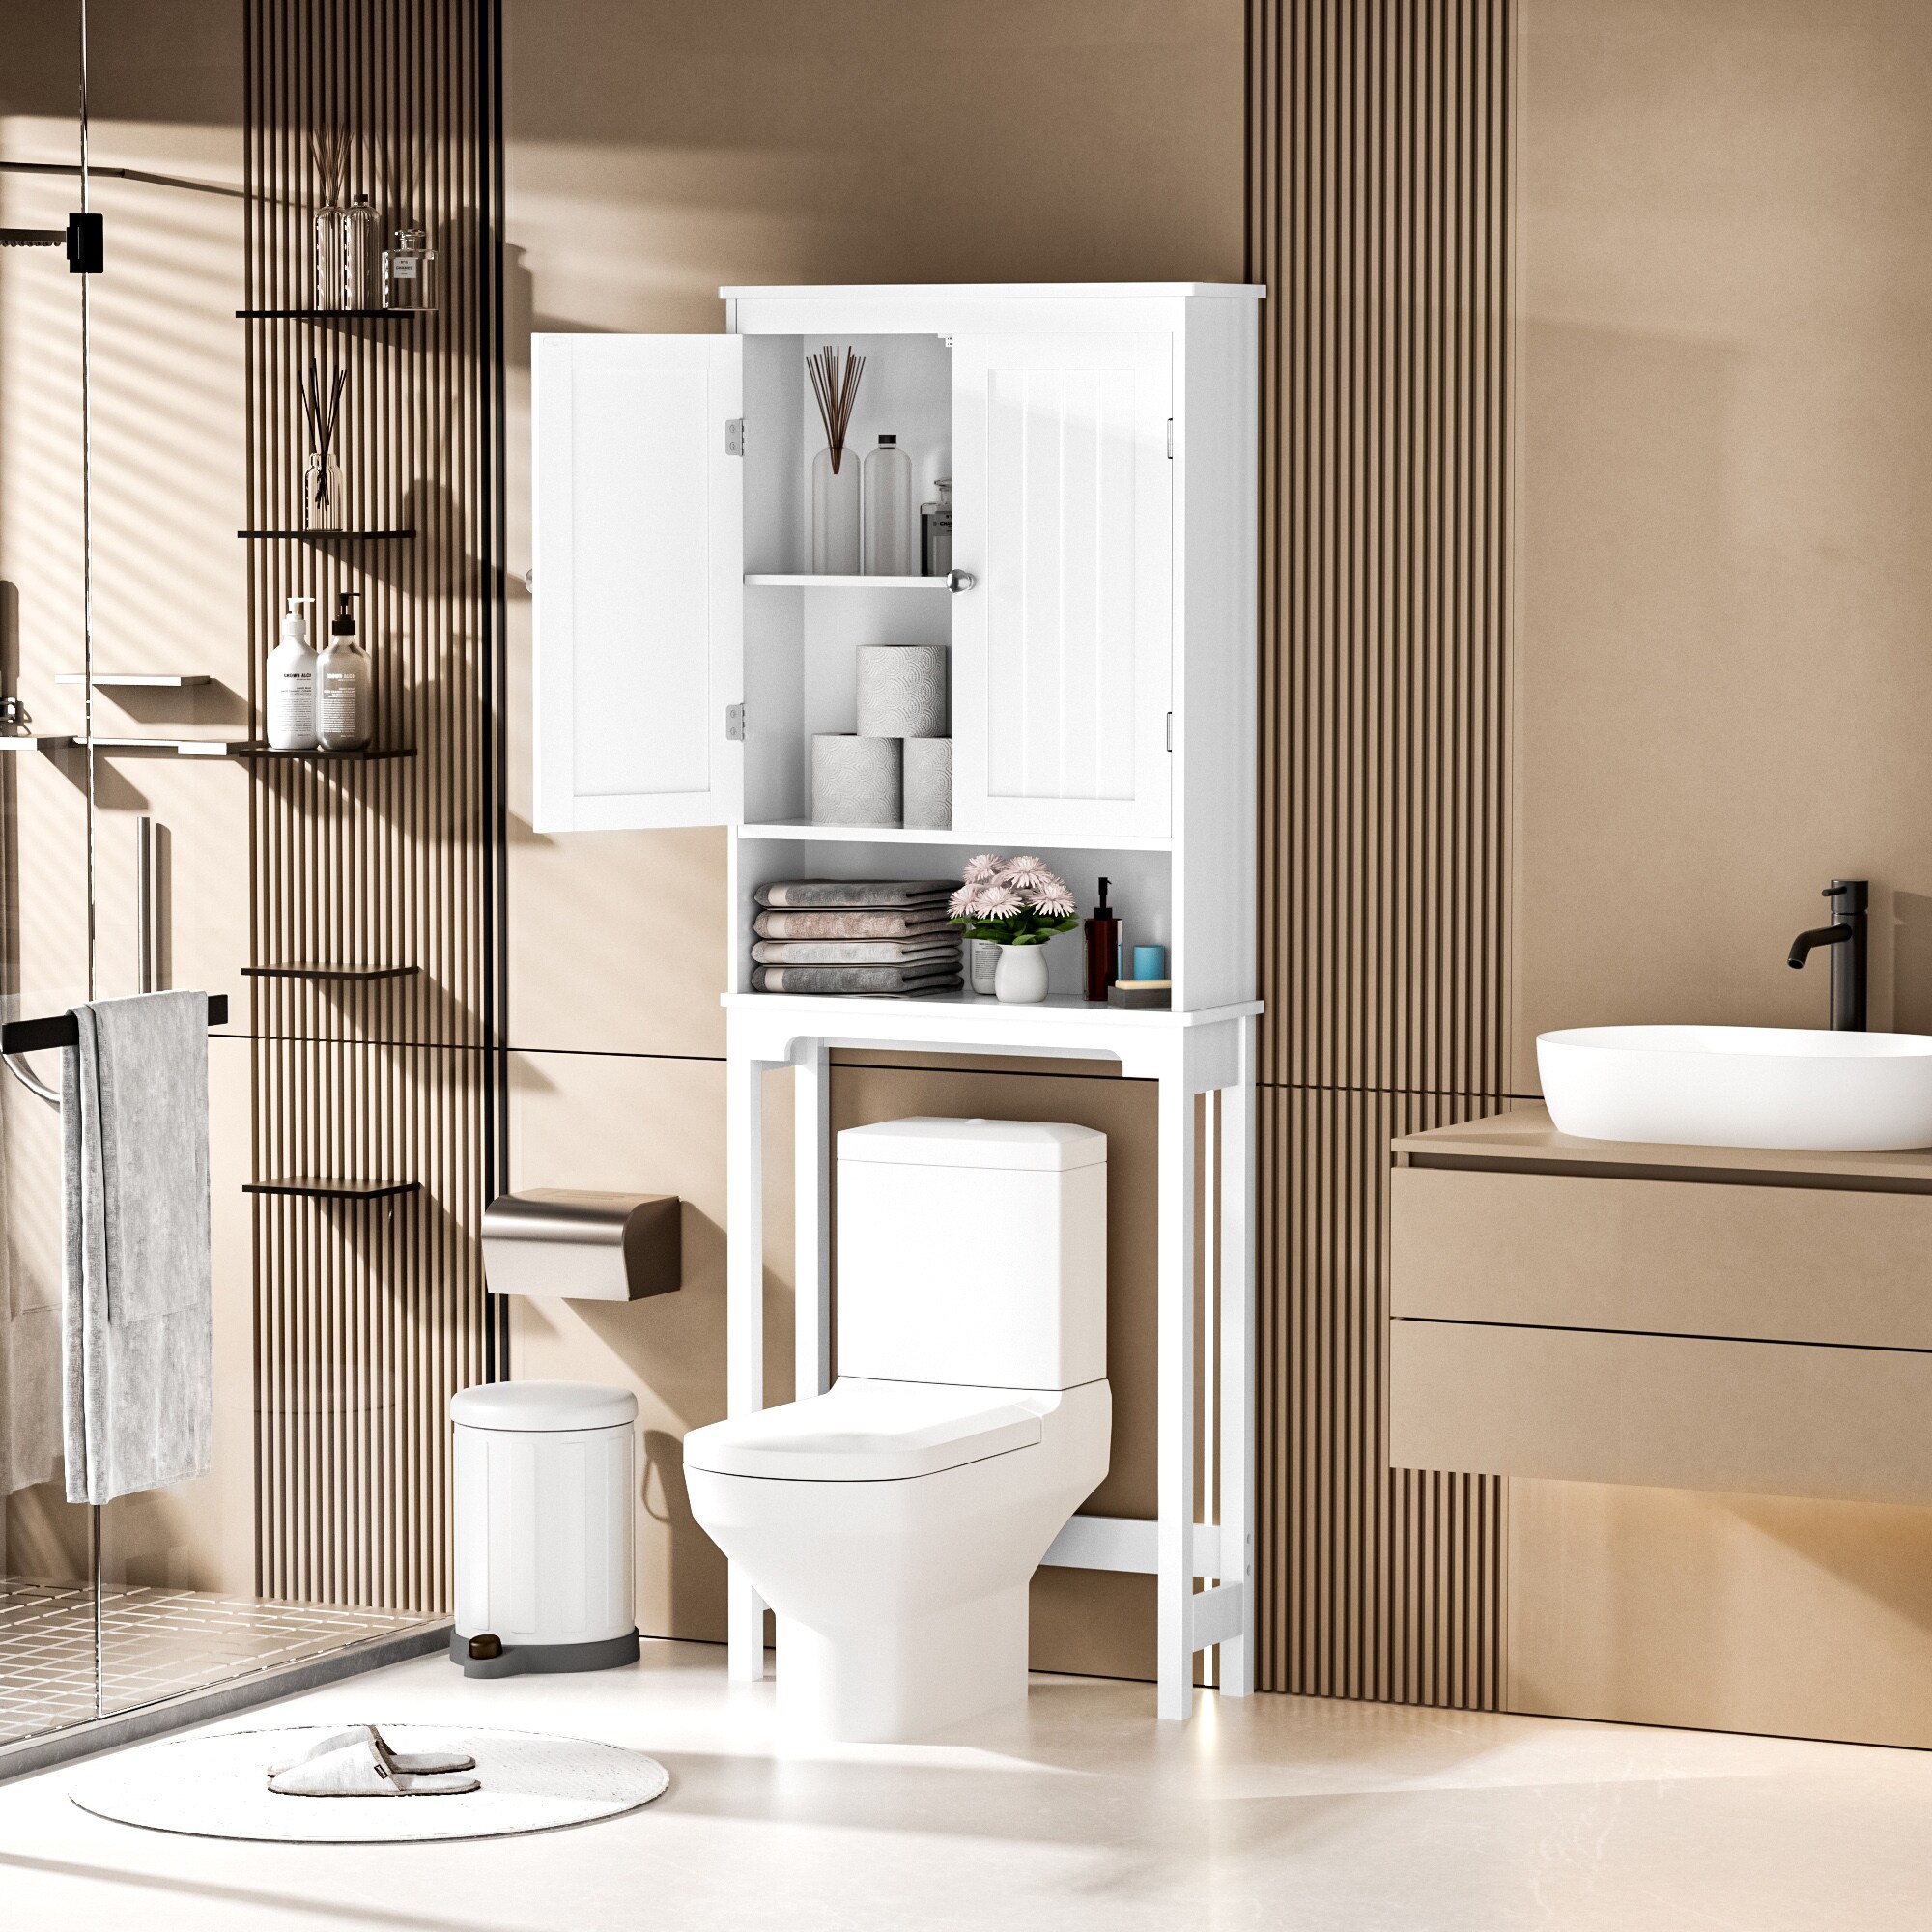 https://ak1.ostkcdn.com/images/products/is/images/direct/eba5de56853e0fb76a5055ae9a07ae15729e1604/White-Wood-Freestanding-Over-the-Toilet-SpaceSaver-Bathroom-Cabinet.jpg